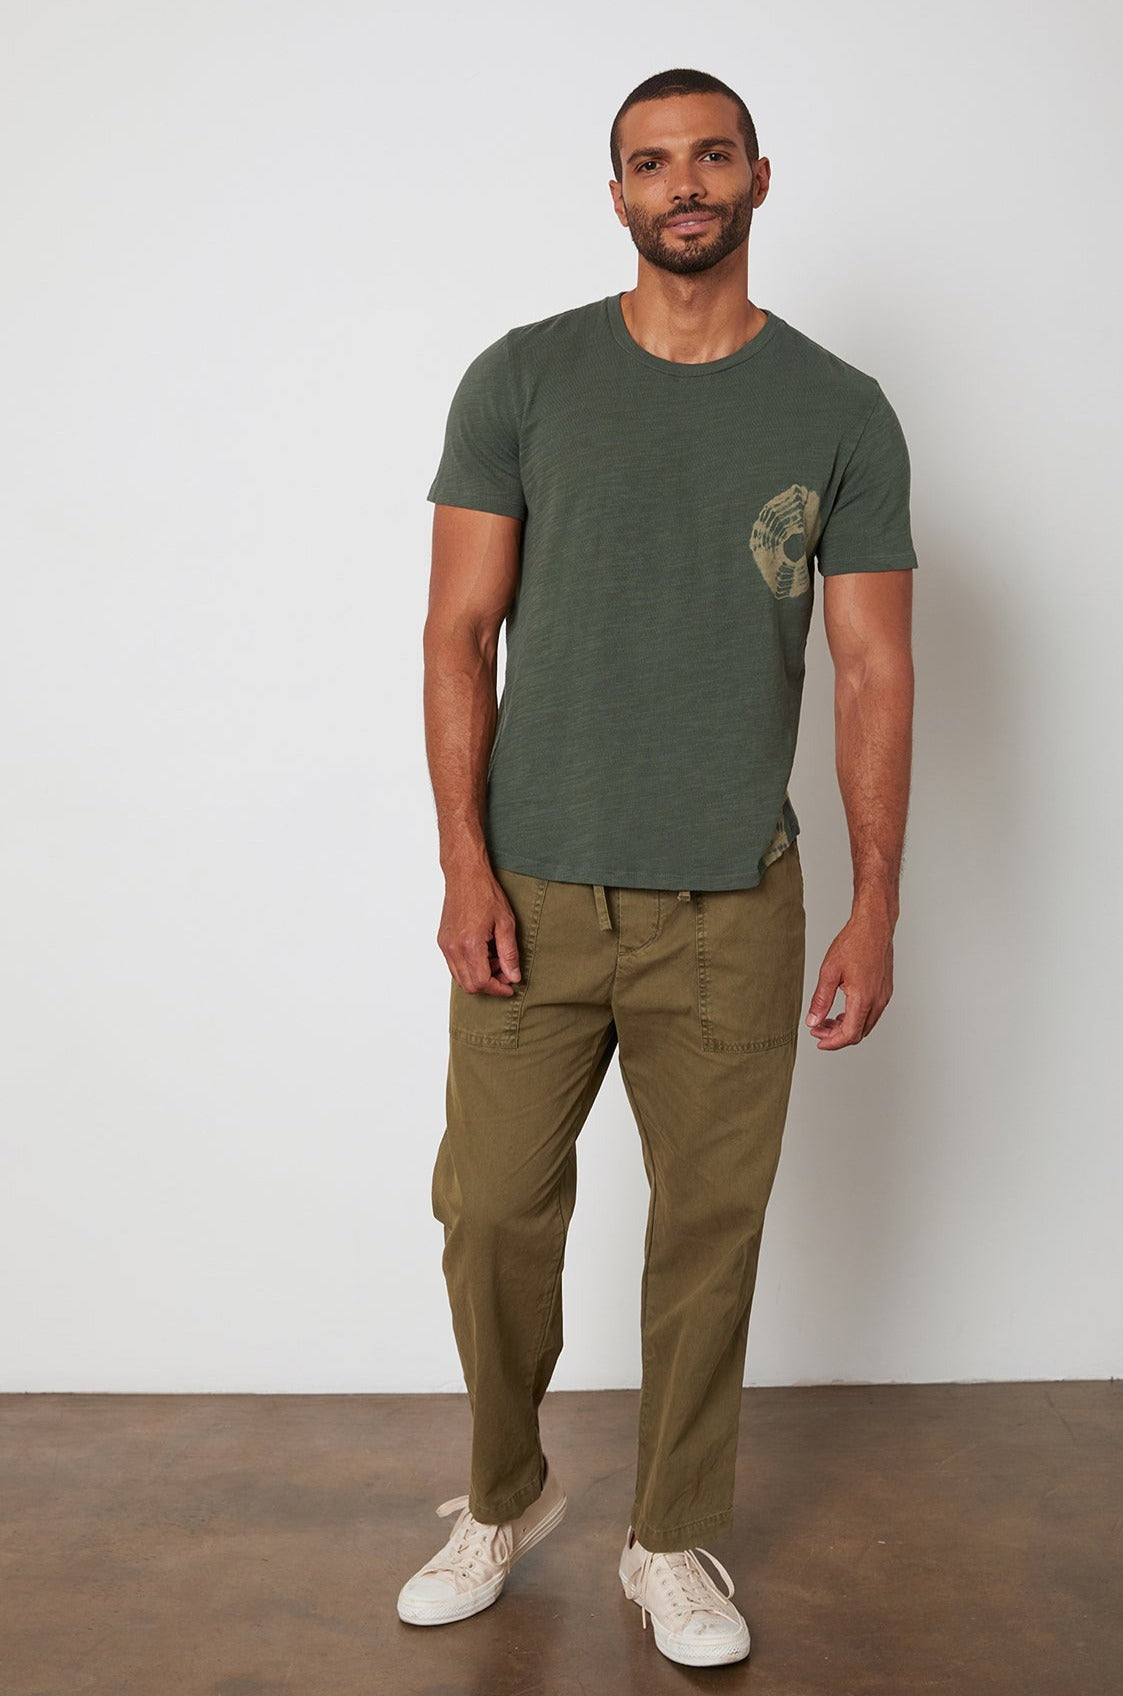   Asher tee olive front 